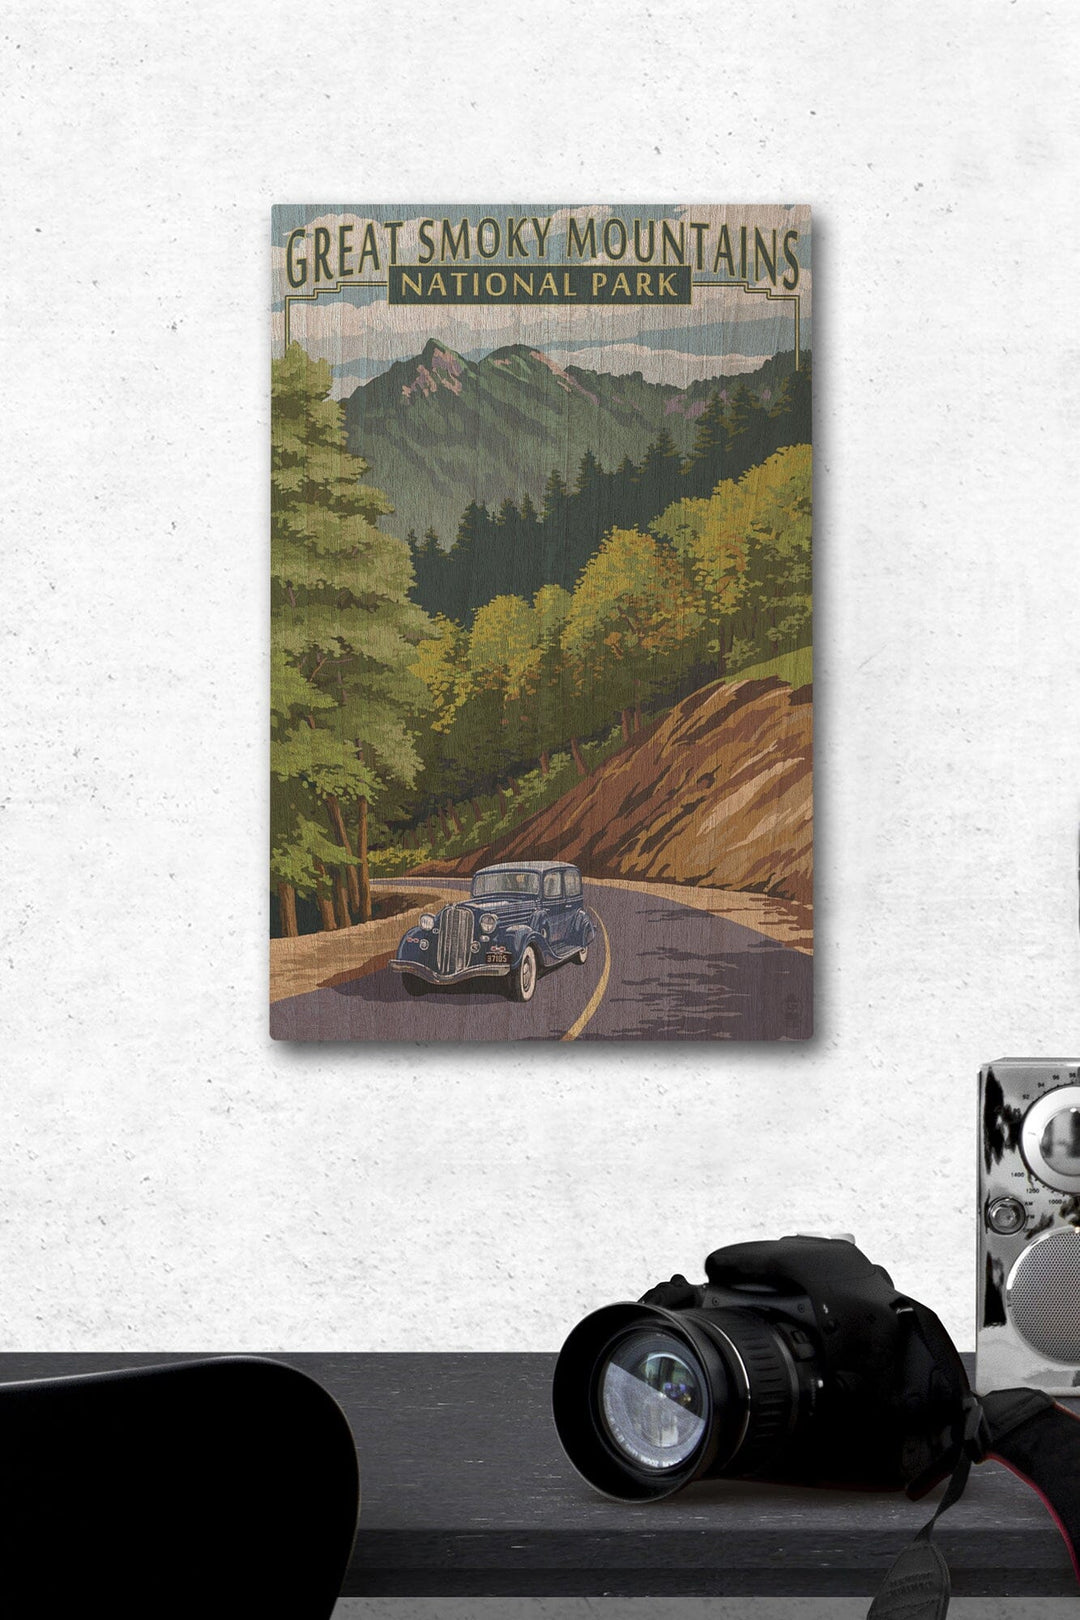 Great Smoky Mountains National Park, Tennesseee, Chimney Tops & Road, Lantern Press Artwork, Wood Signs and Postcards Wood Lantern Press 12 x 18 Wood Gallery Print 